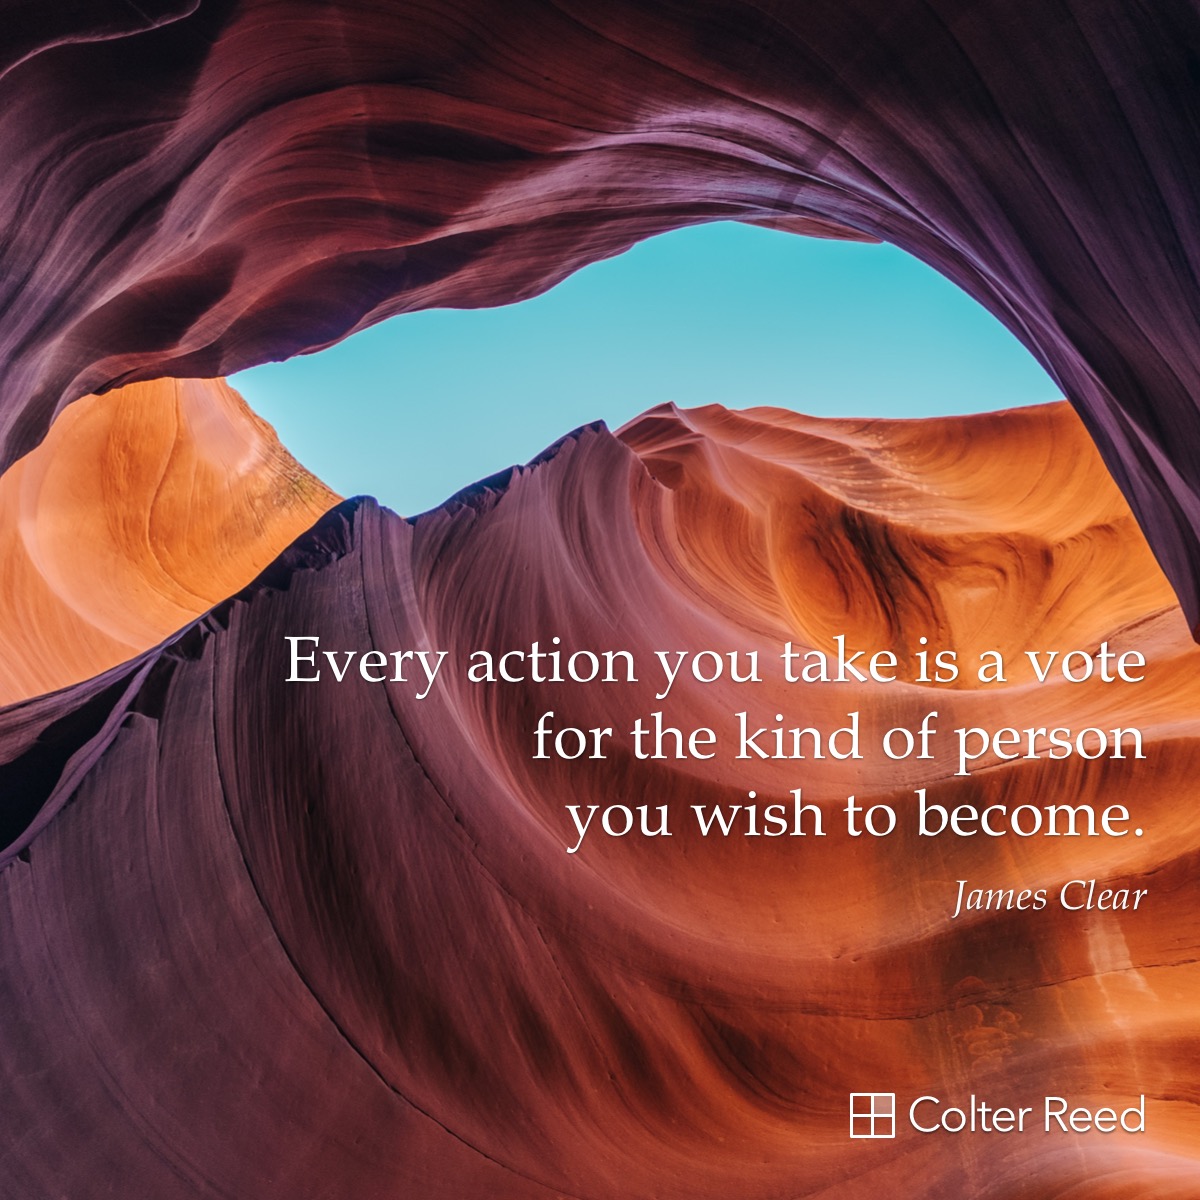 Every action you take is a vote for the kind of person you wish to become. —James Clear